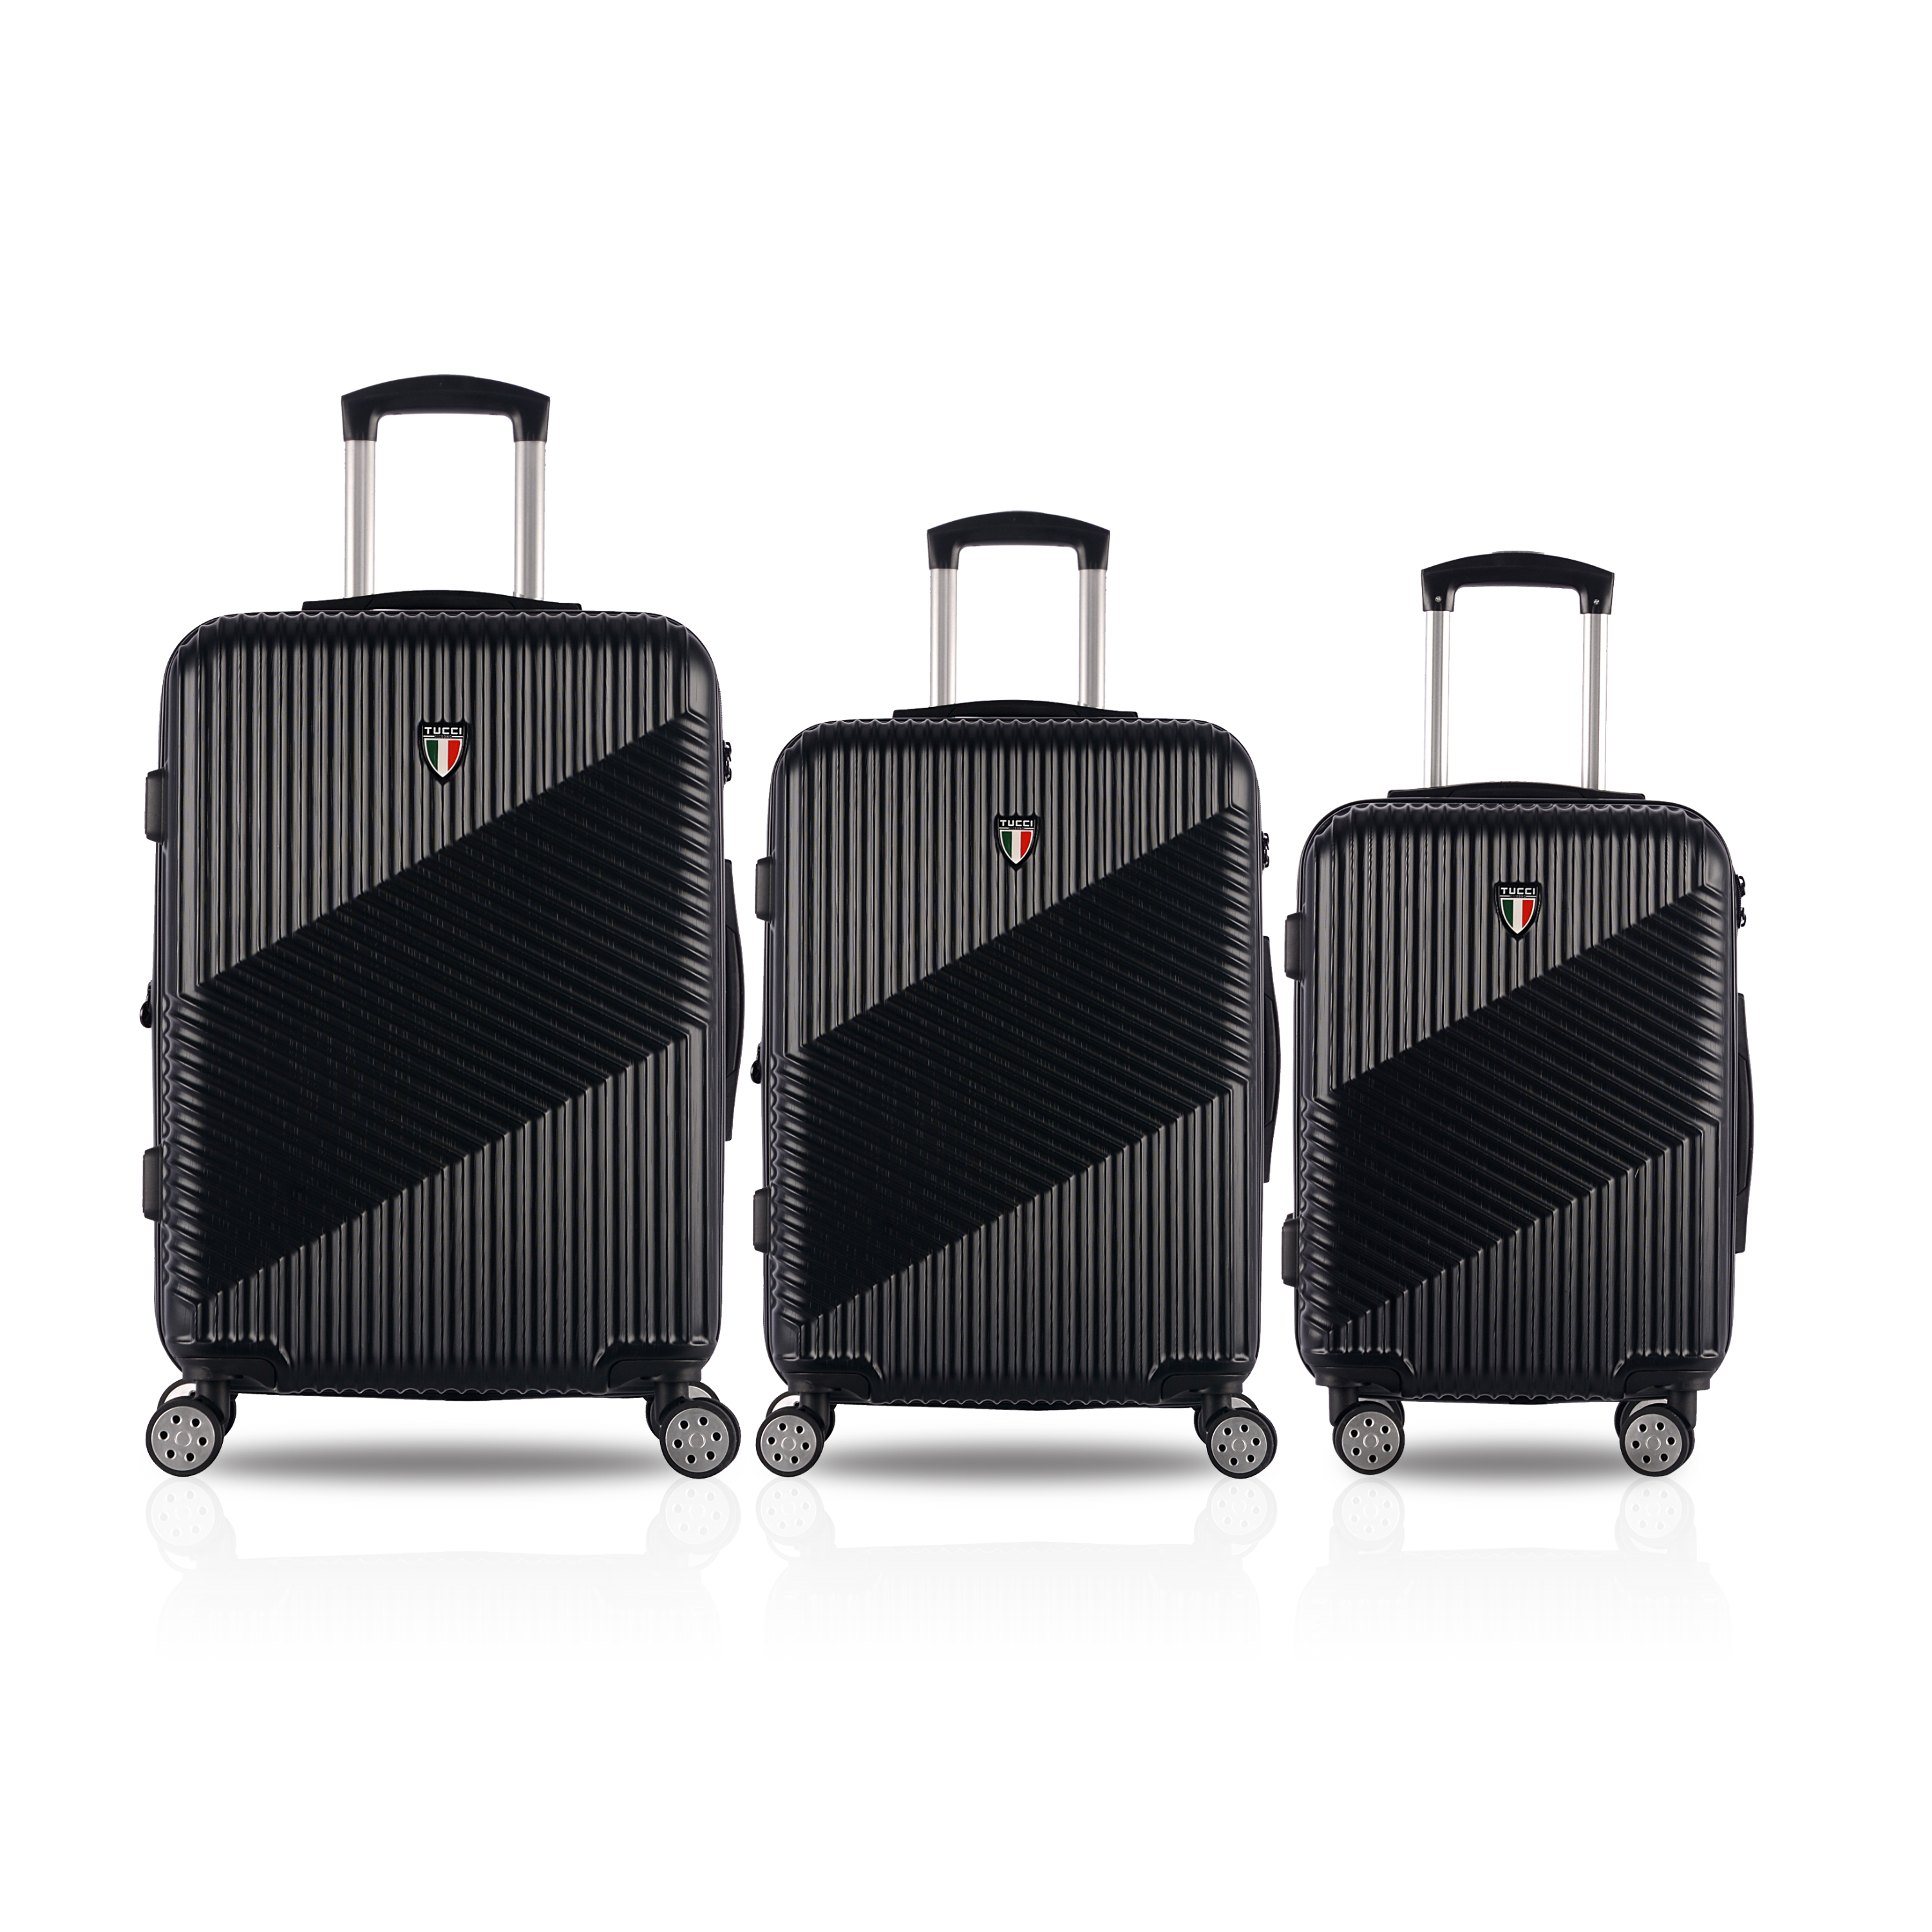 TUCCI Italy TRIPLETTA 20 Carry-On Luggage Suitcase – Tucci